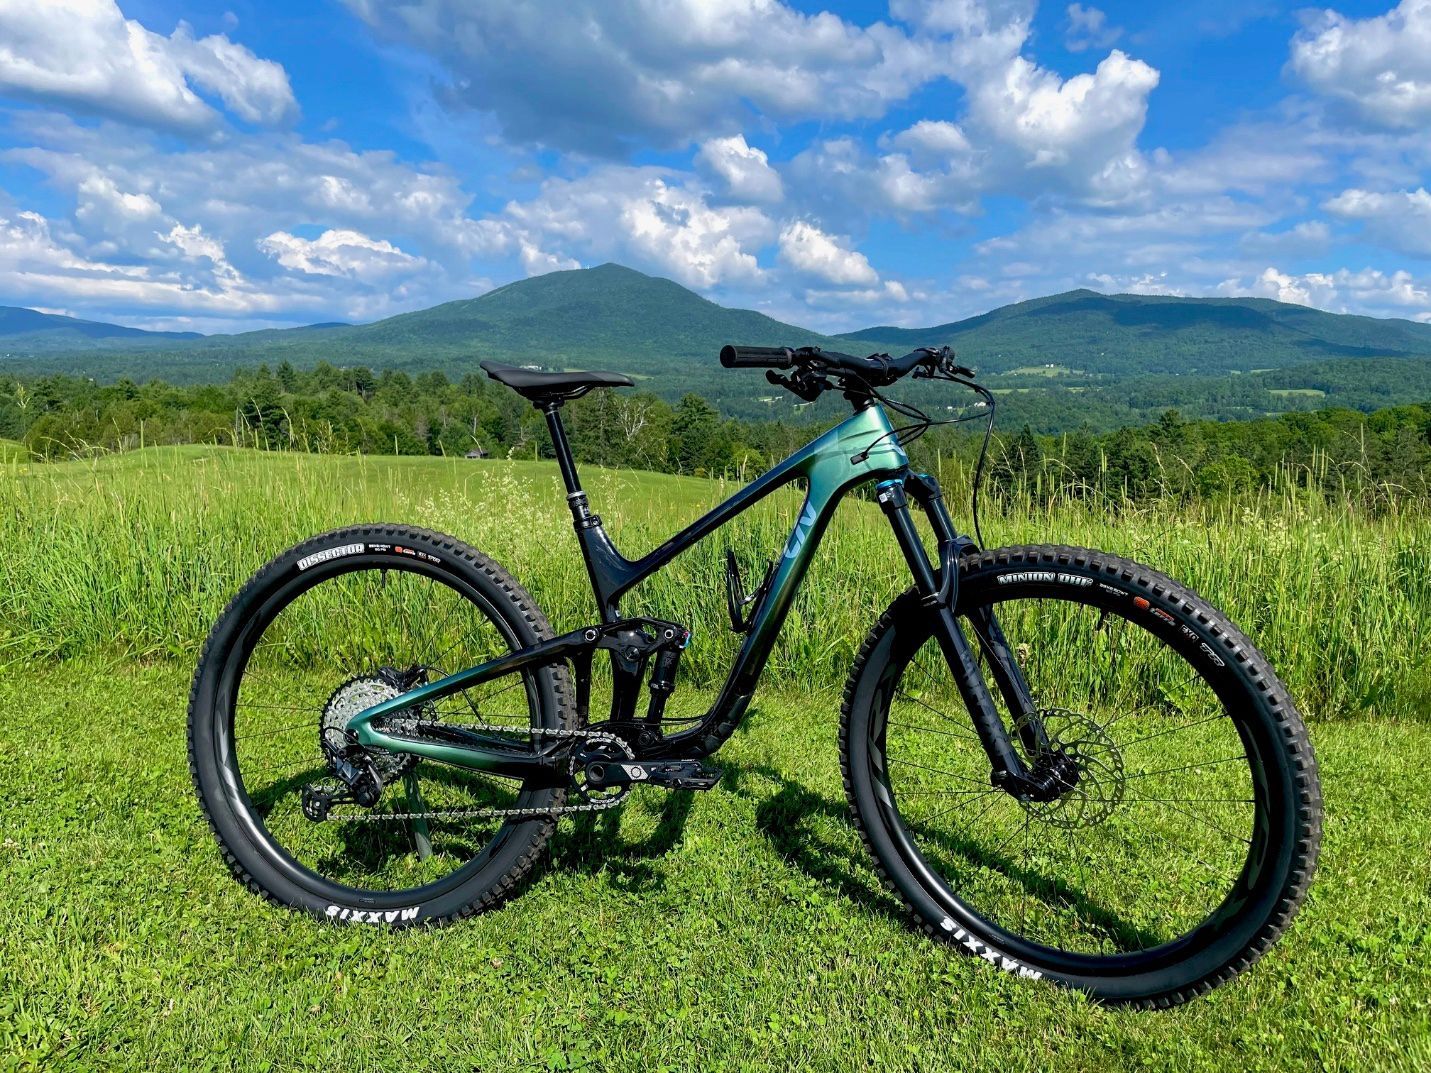 Green aluminum Liv Intrigue 2 mountain bike in a field with Burke Mountain, Vermont in the backgroun